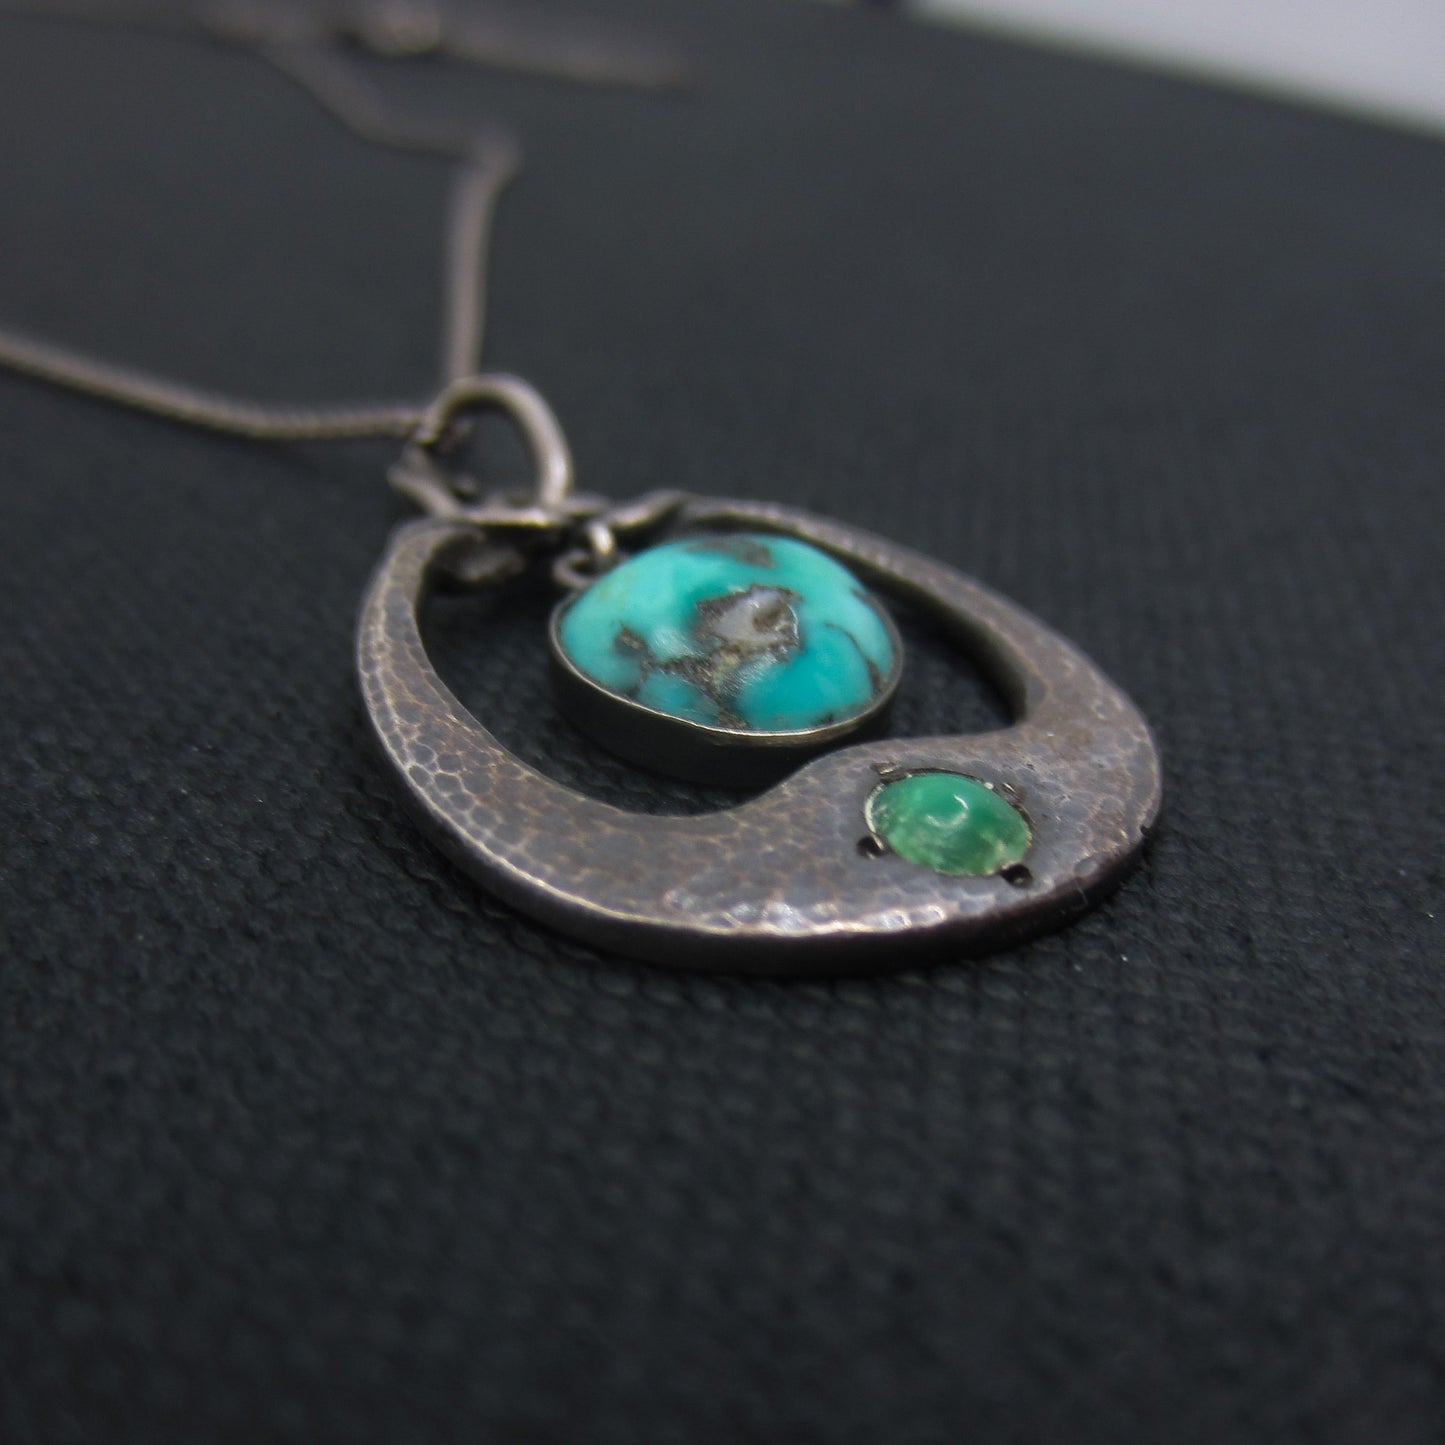 SOLD--Rare Arts & Crafts Hammered Turquoise Pendant Sterling, Liberty & Co c. 1910